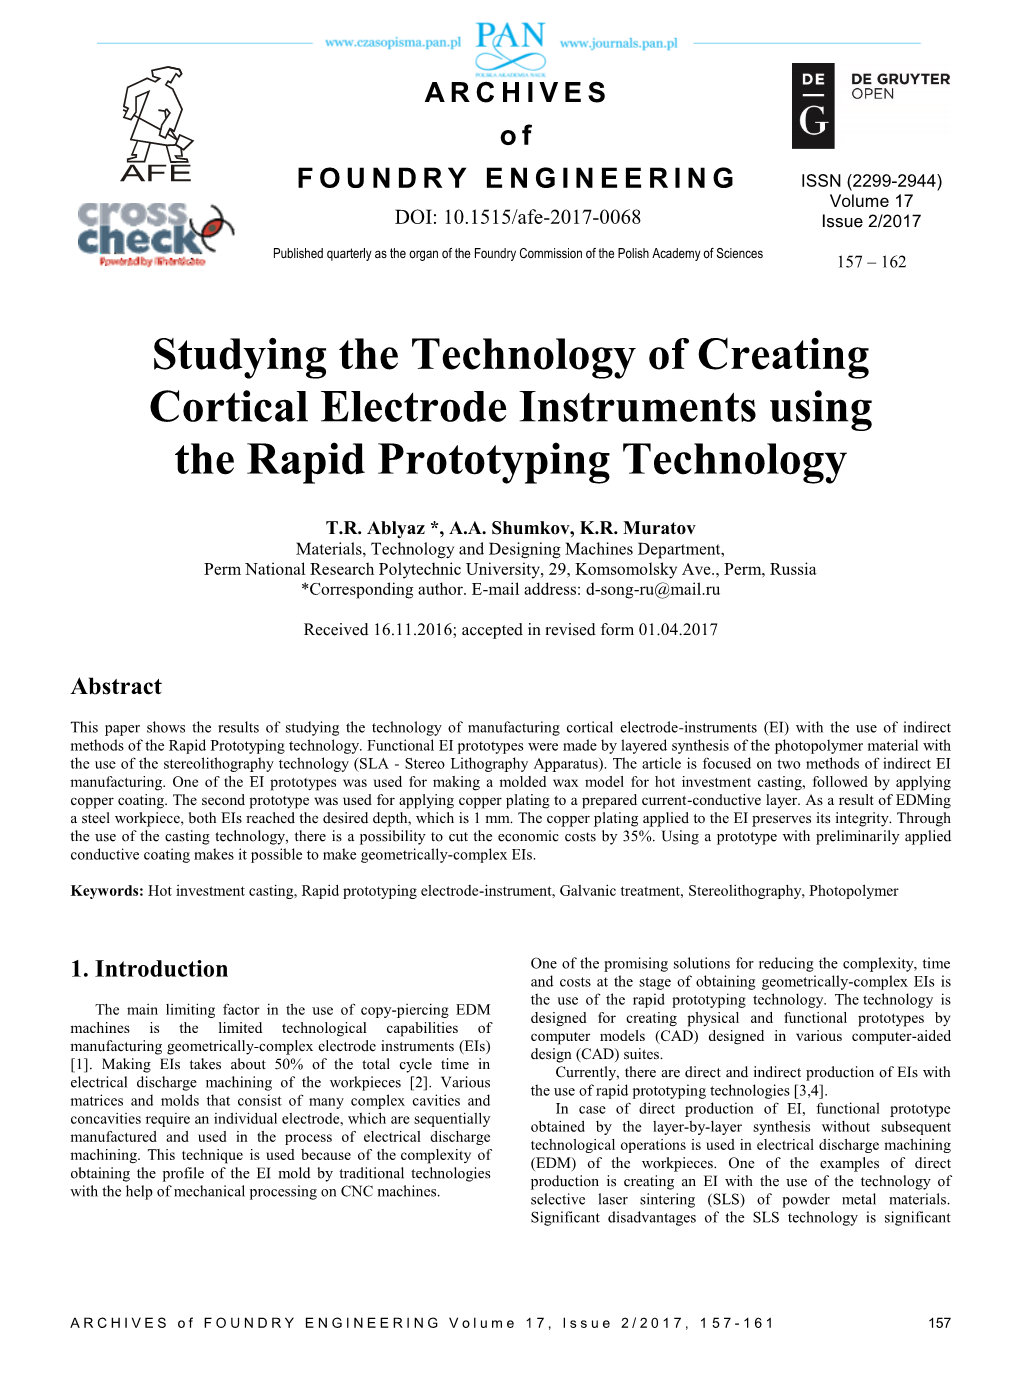 Studying the Technology of Creating Cortical Electrode Instruments Using the Rapid Prototyping Technology